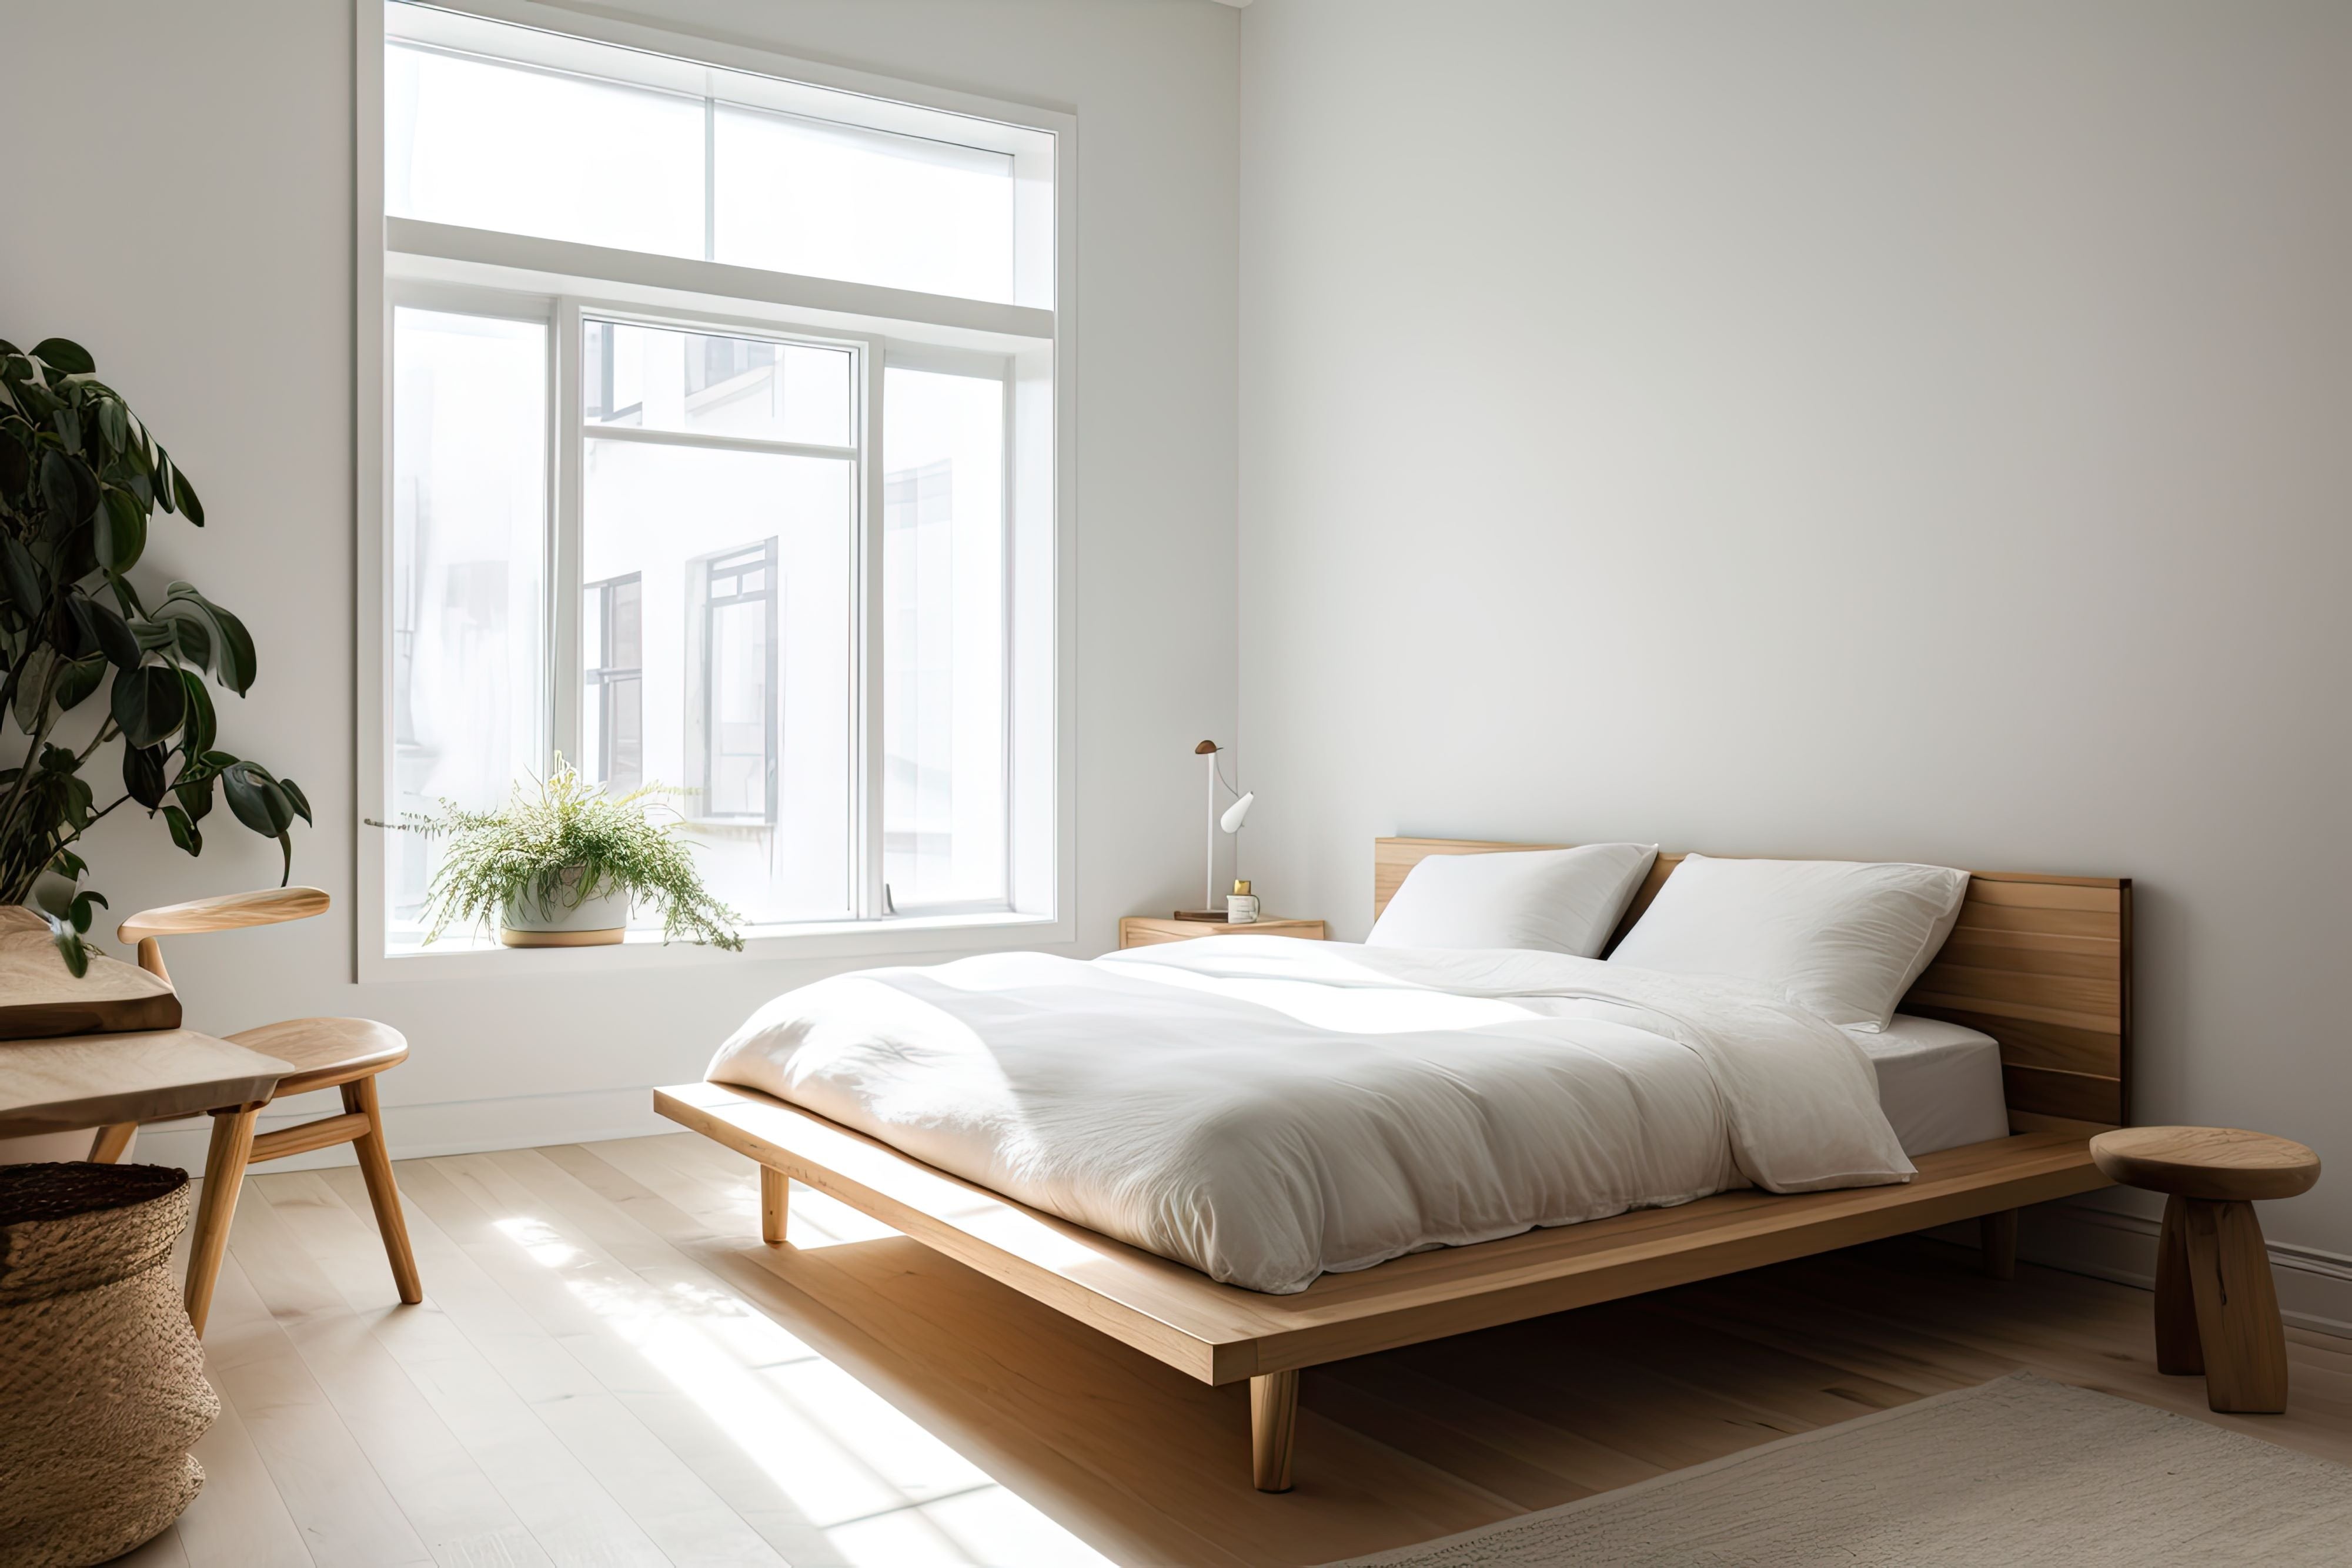 A serene and minimalist bedroom with a platform bed, white bedding, and a simple wooden headboard, featuring a neutral color palette and plenty of natural light